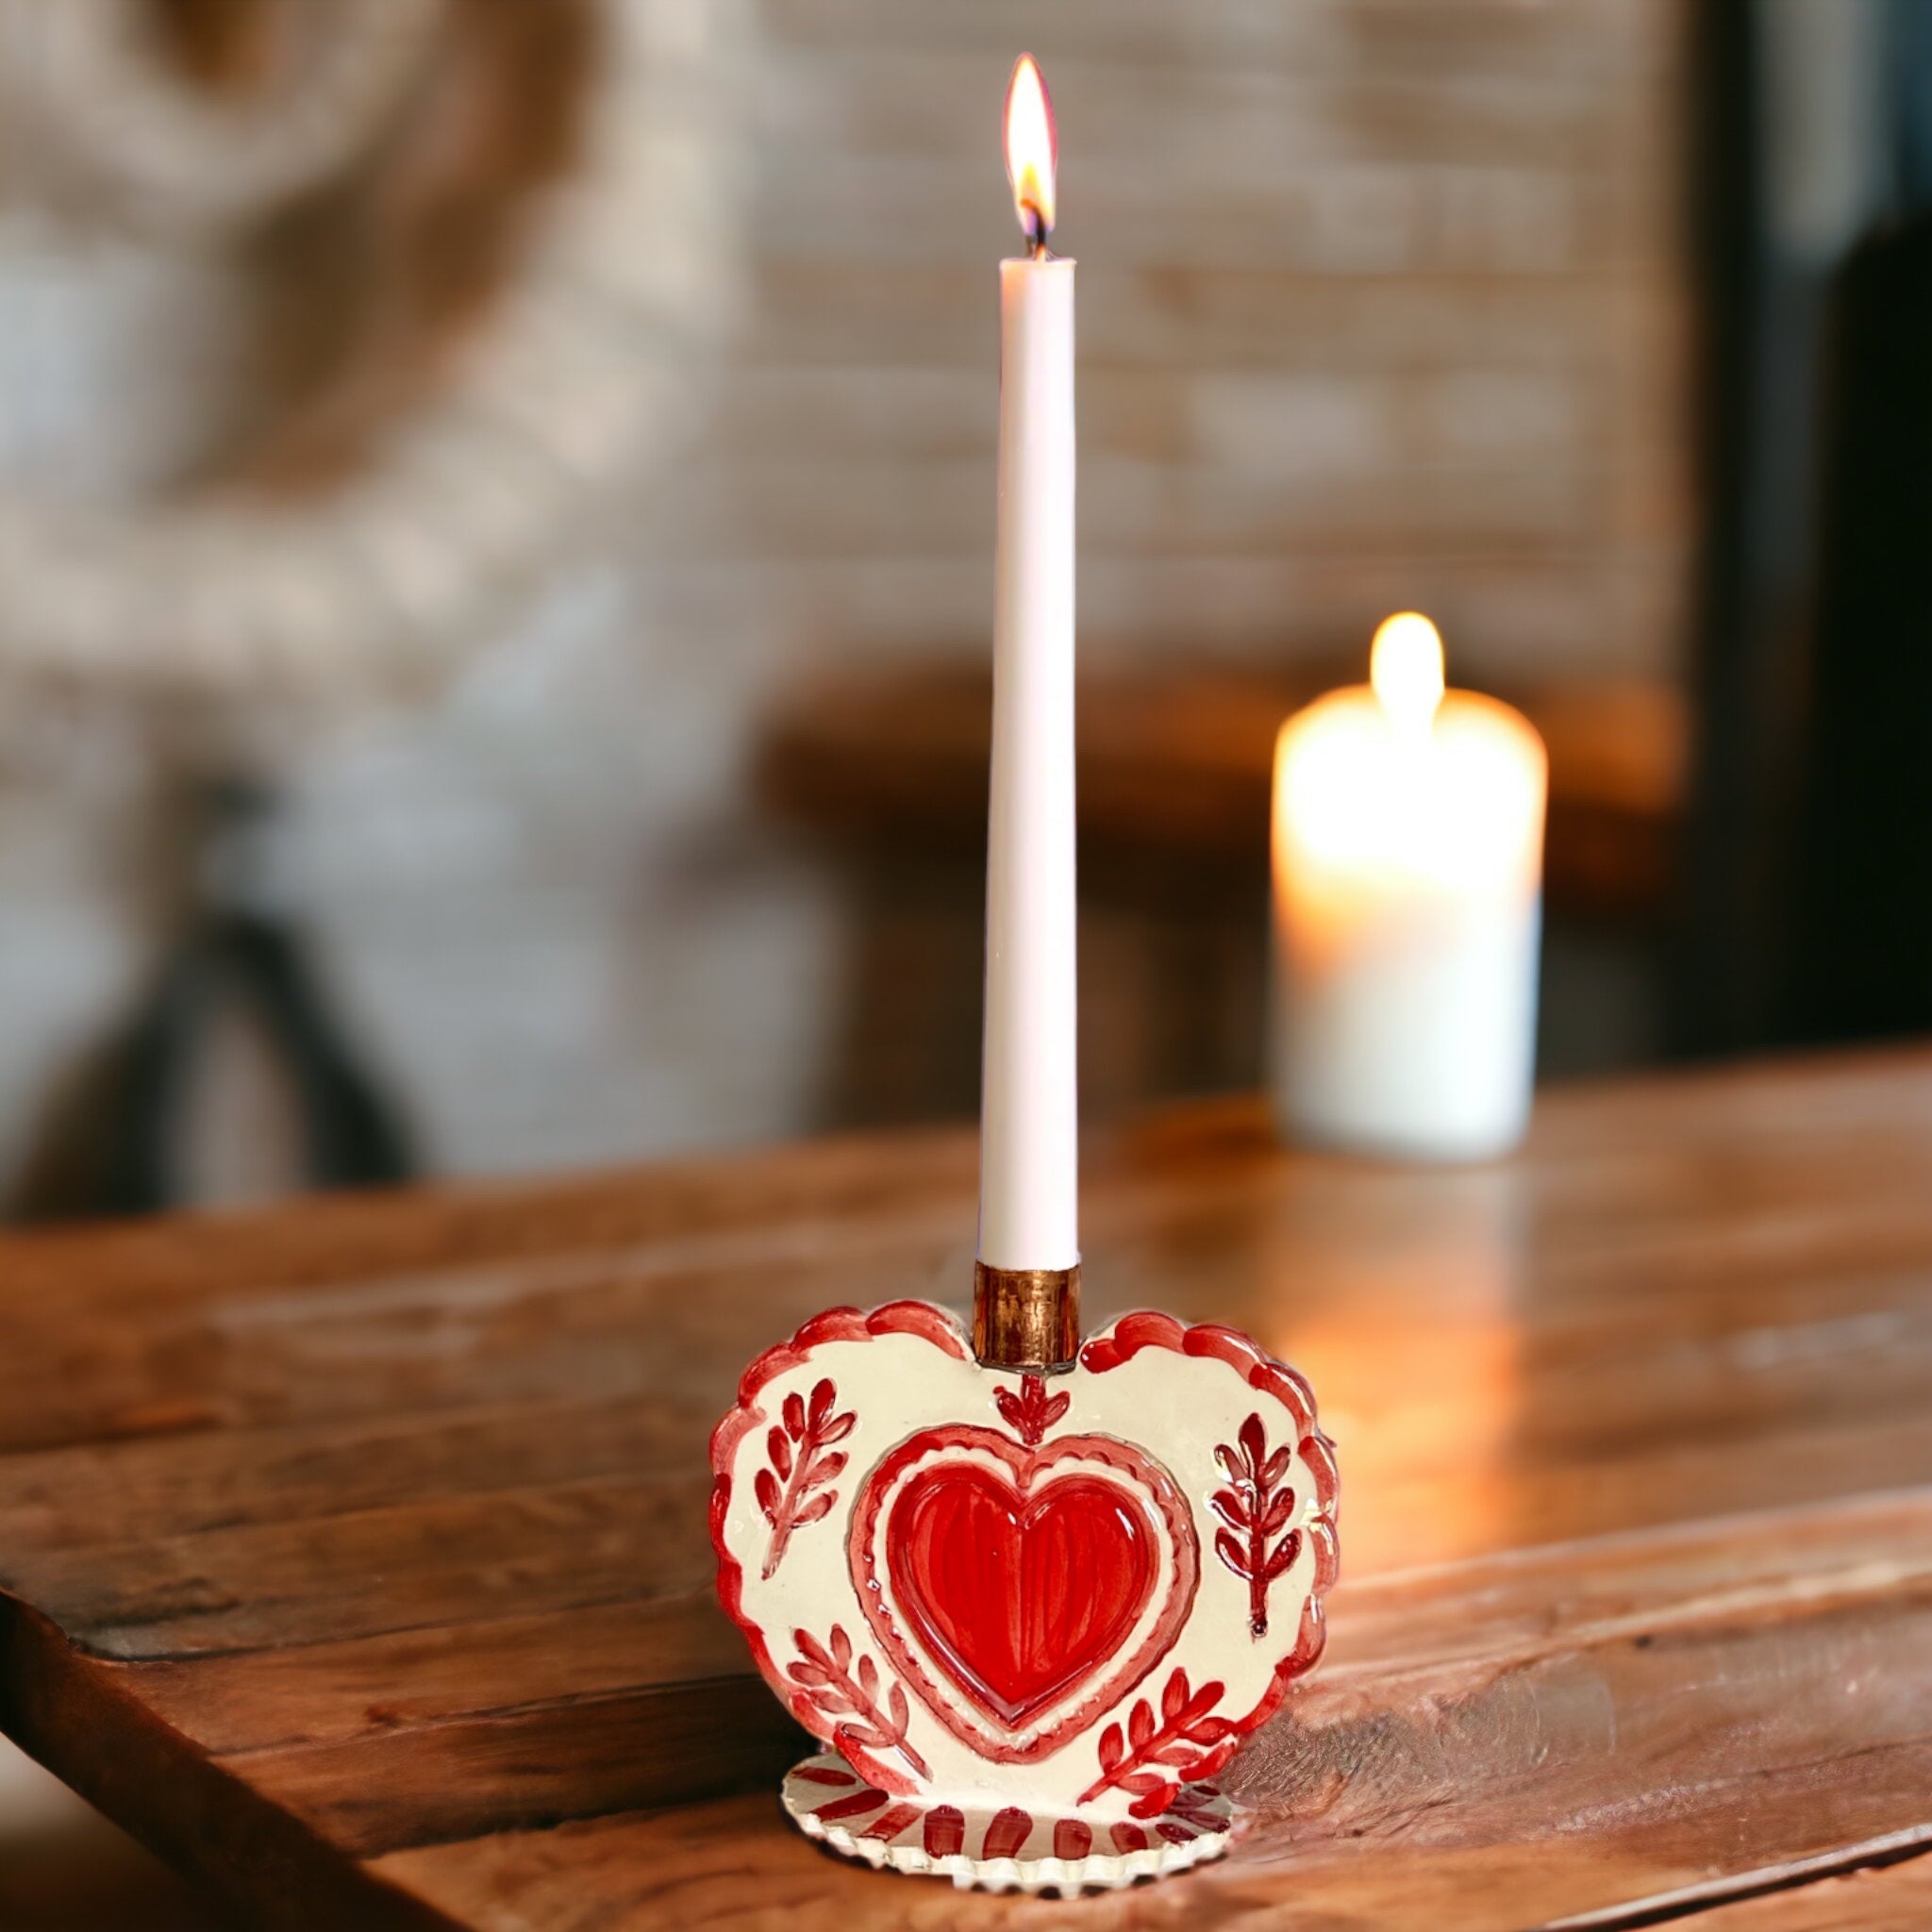 Pair of 2 Heart Candlestick Holders - Premium Cake Topper from Tricia Lowenfield Design 